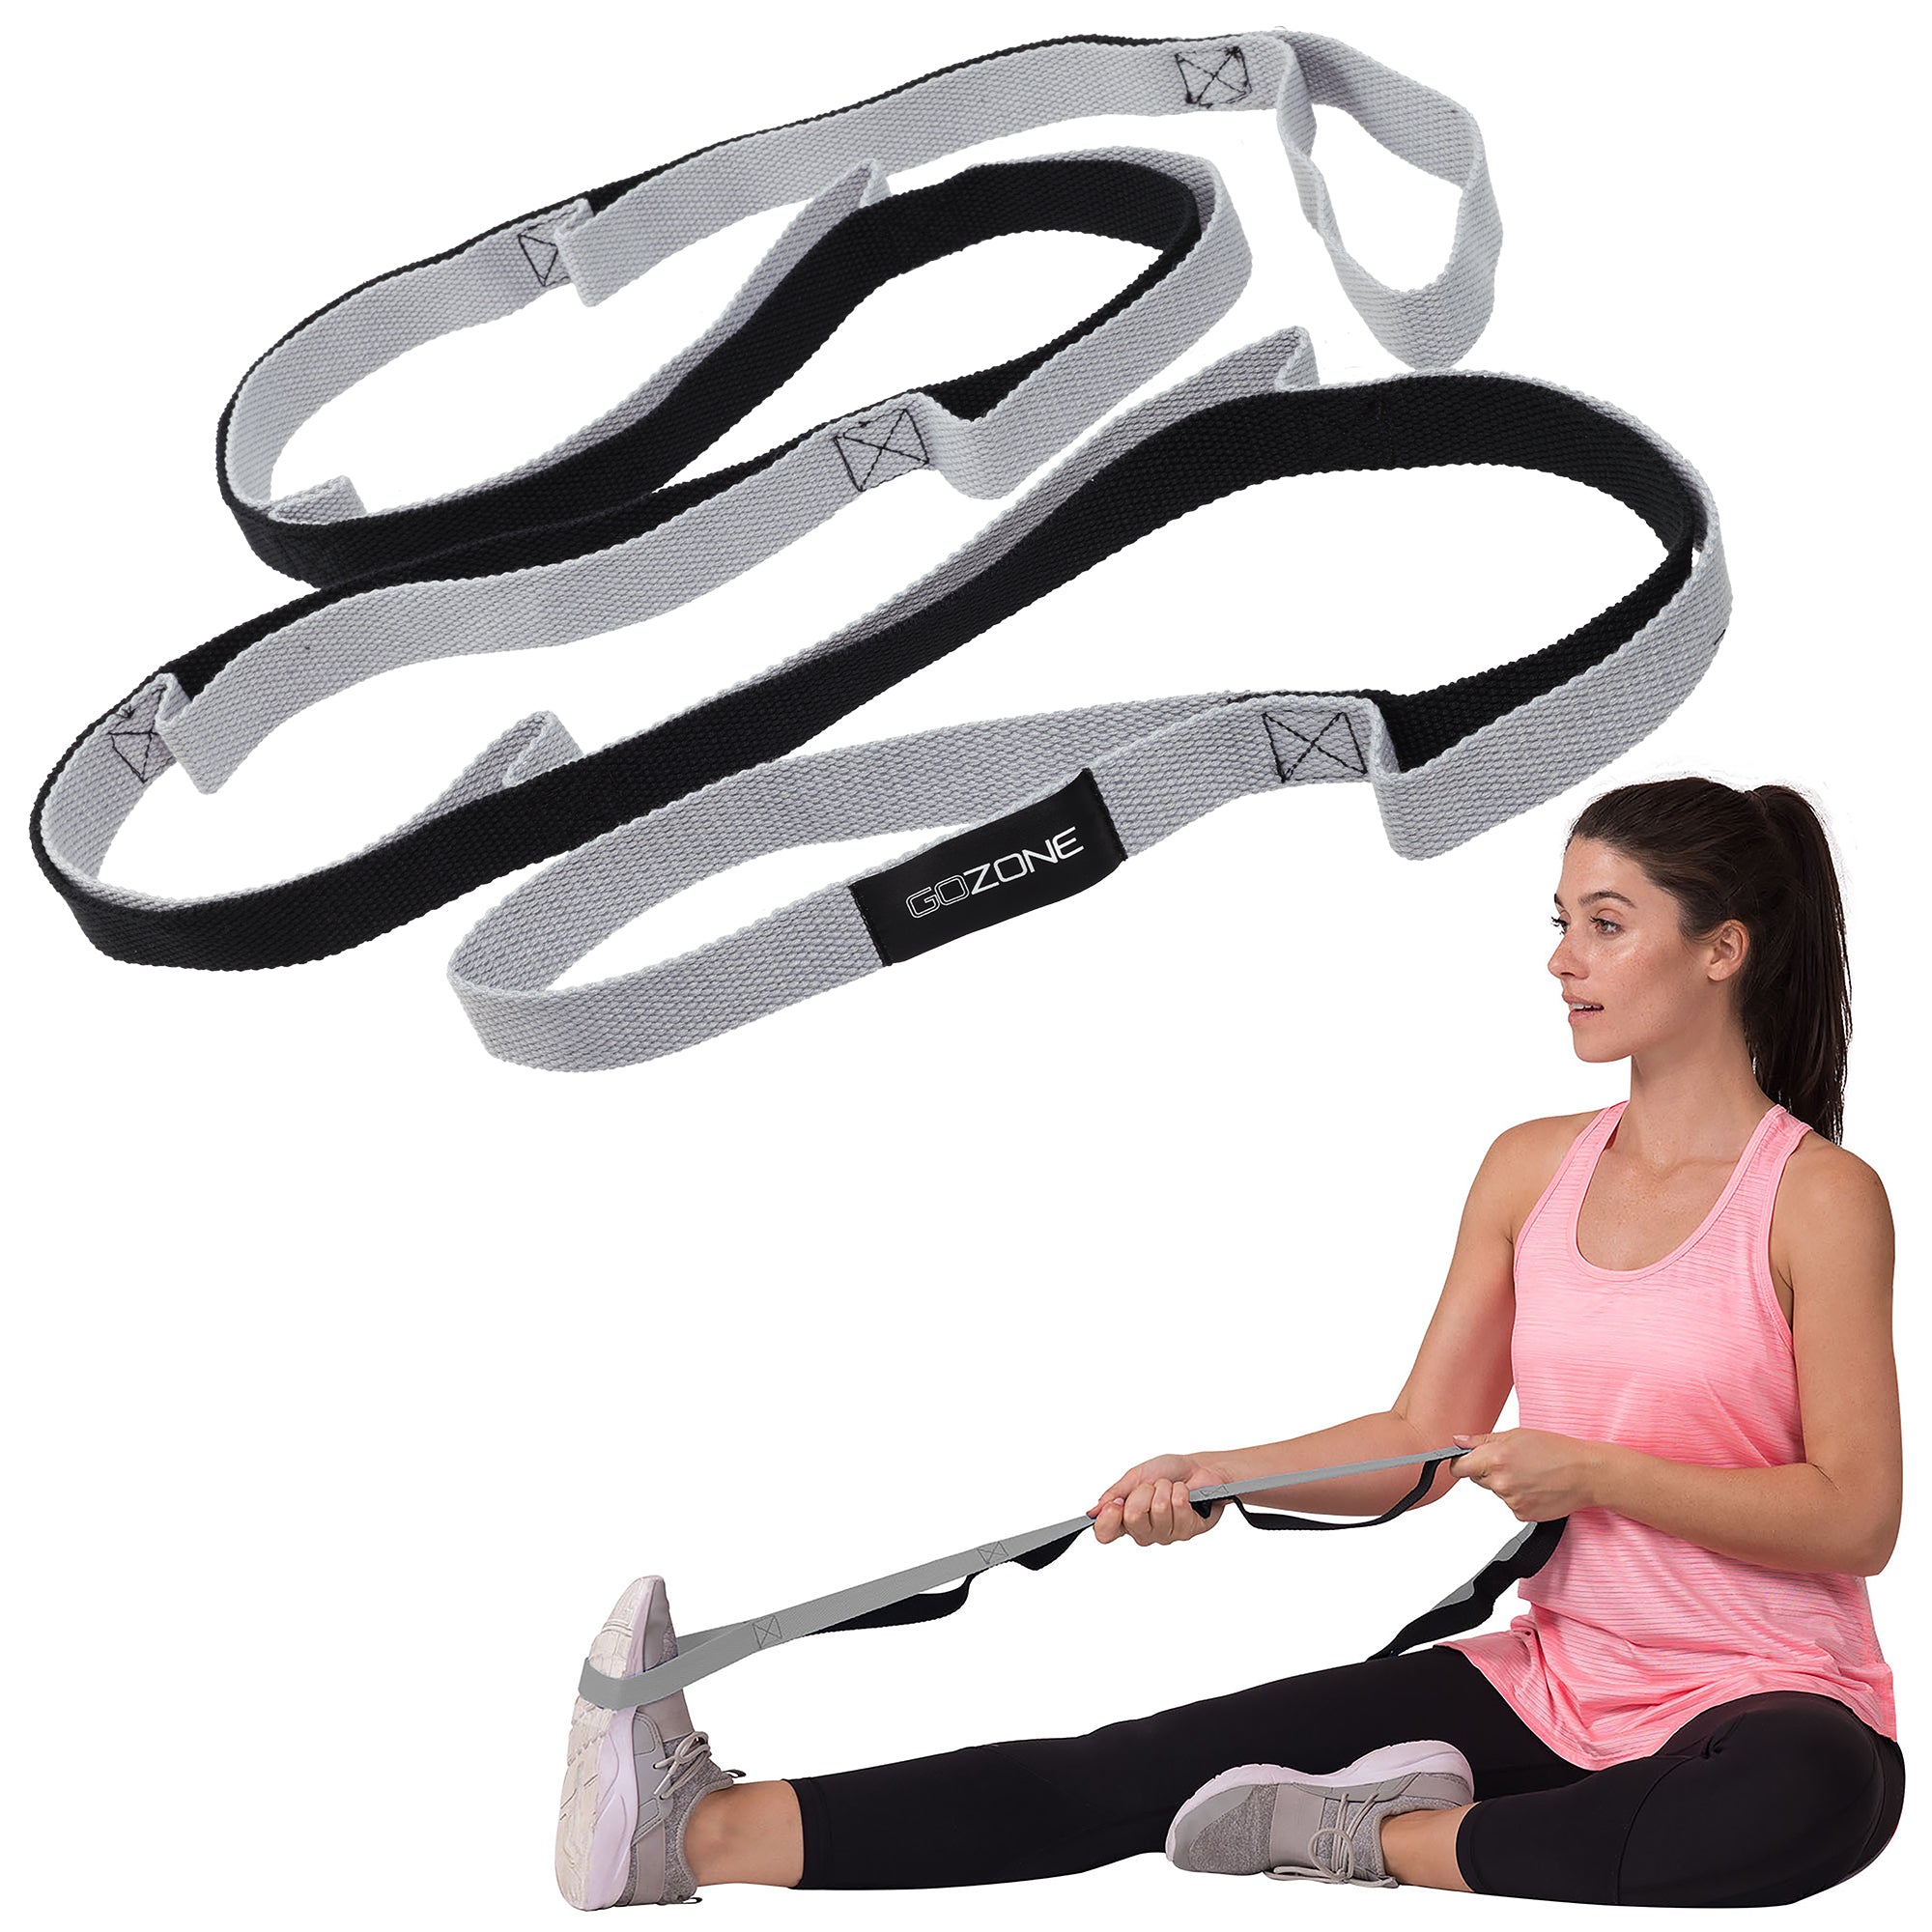 GoZone All-in-One Resistance Band Set – Multi-Colour 